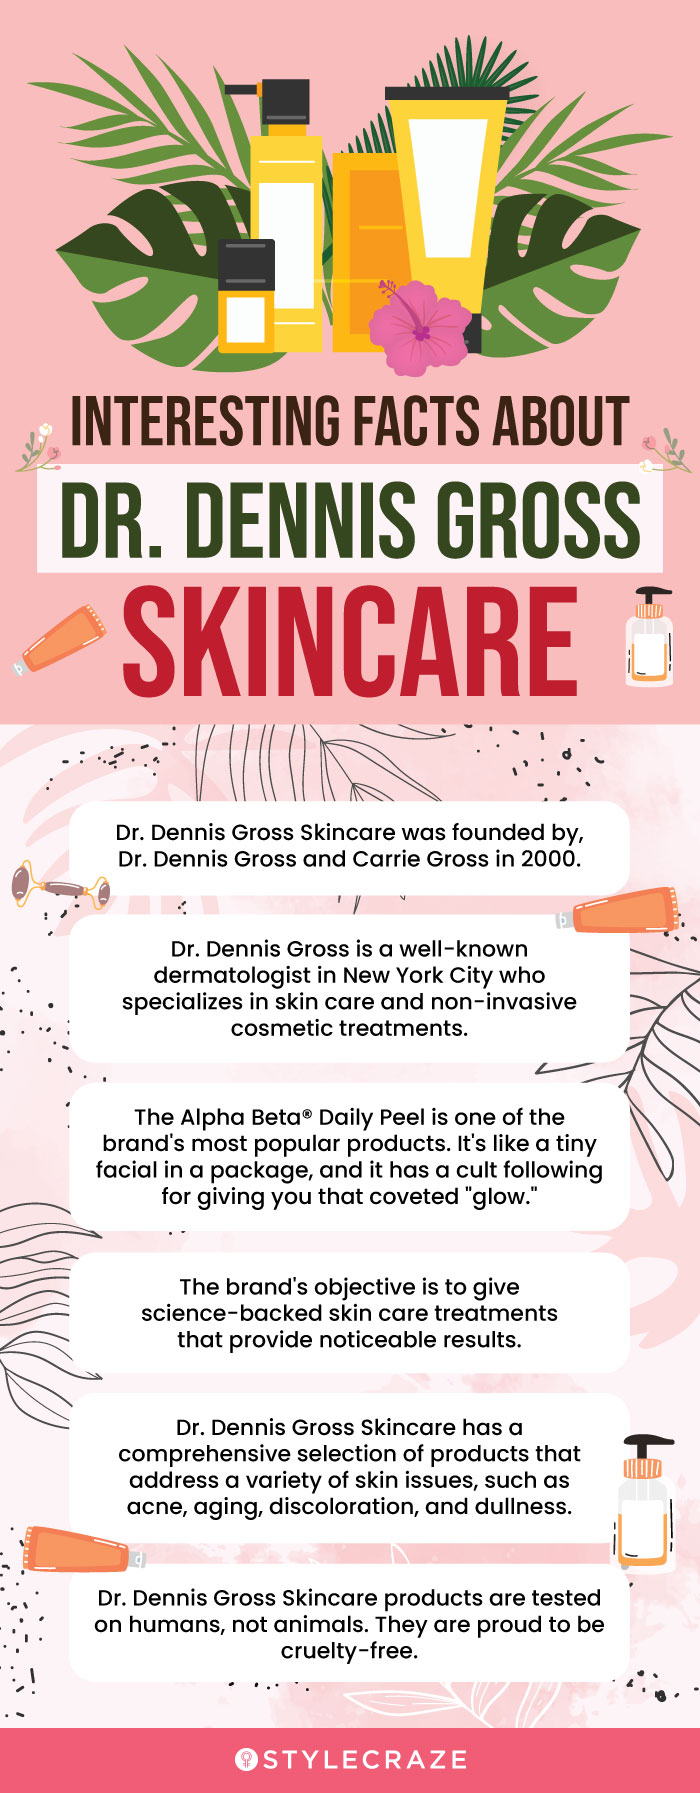 Interesting Facts About Dr. Dennis Gross Skincare (infographic)